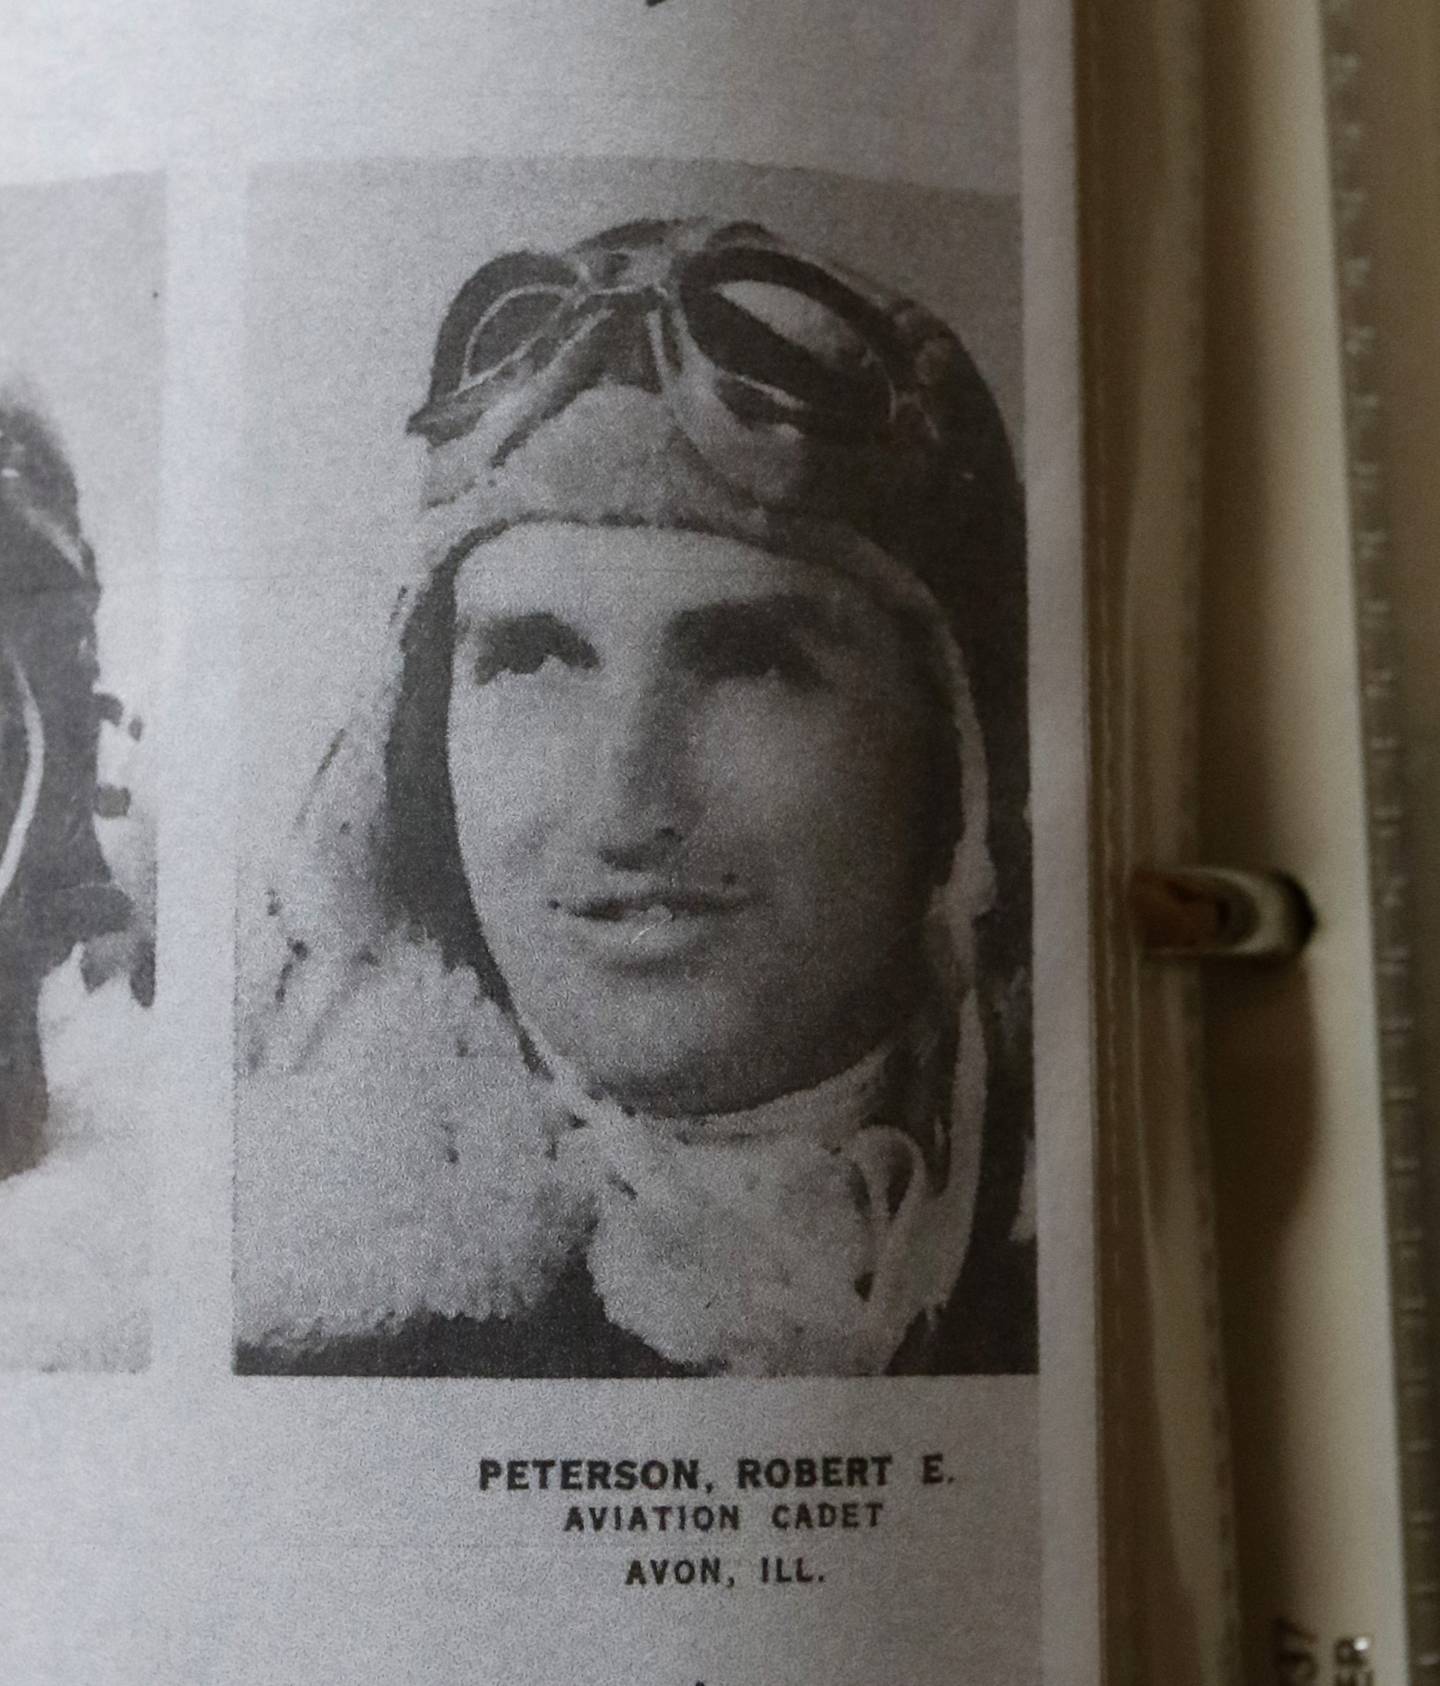 A photograph in a binder of Art Peterson’s father, U.S. Army Air Forces Staff Sgt. Robert E. Peterson. Art Peterson, a retired journalist, wrote a book based on the letters his father wrote to his mother during World War II.